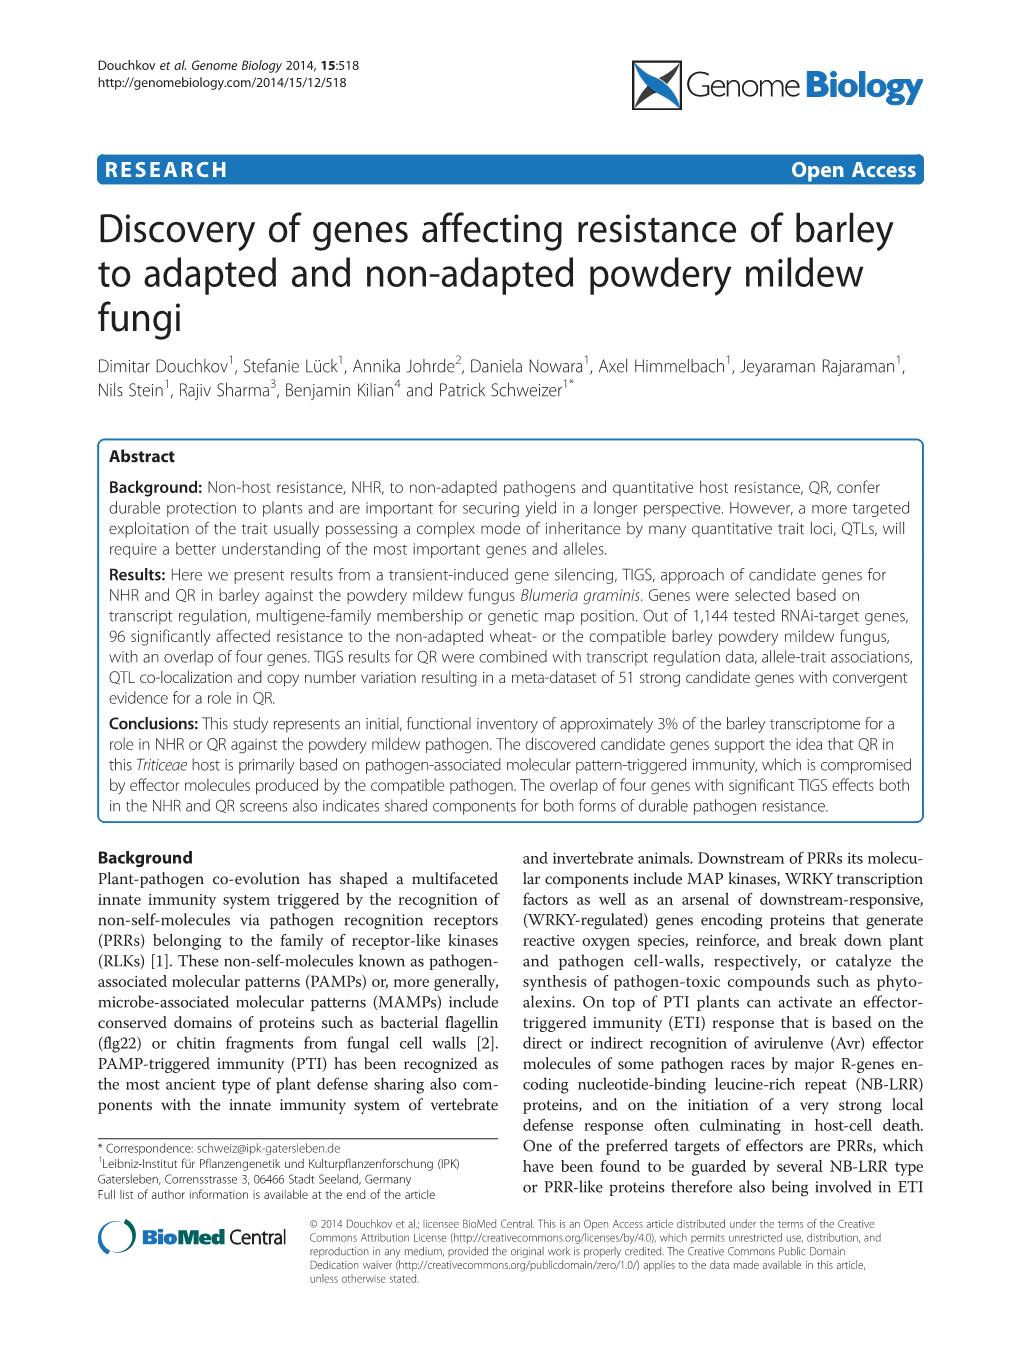 Discovery of Genes Affecting Resistance of Barley to Adapted And